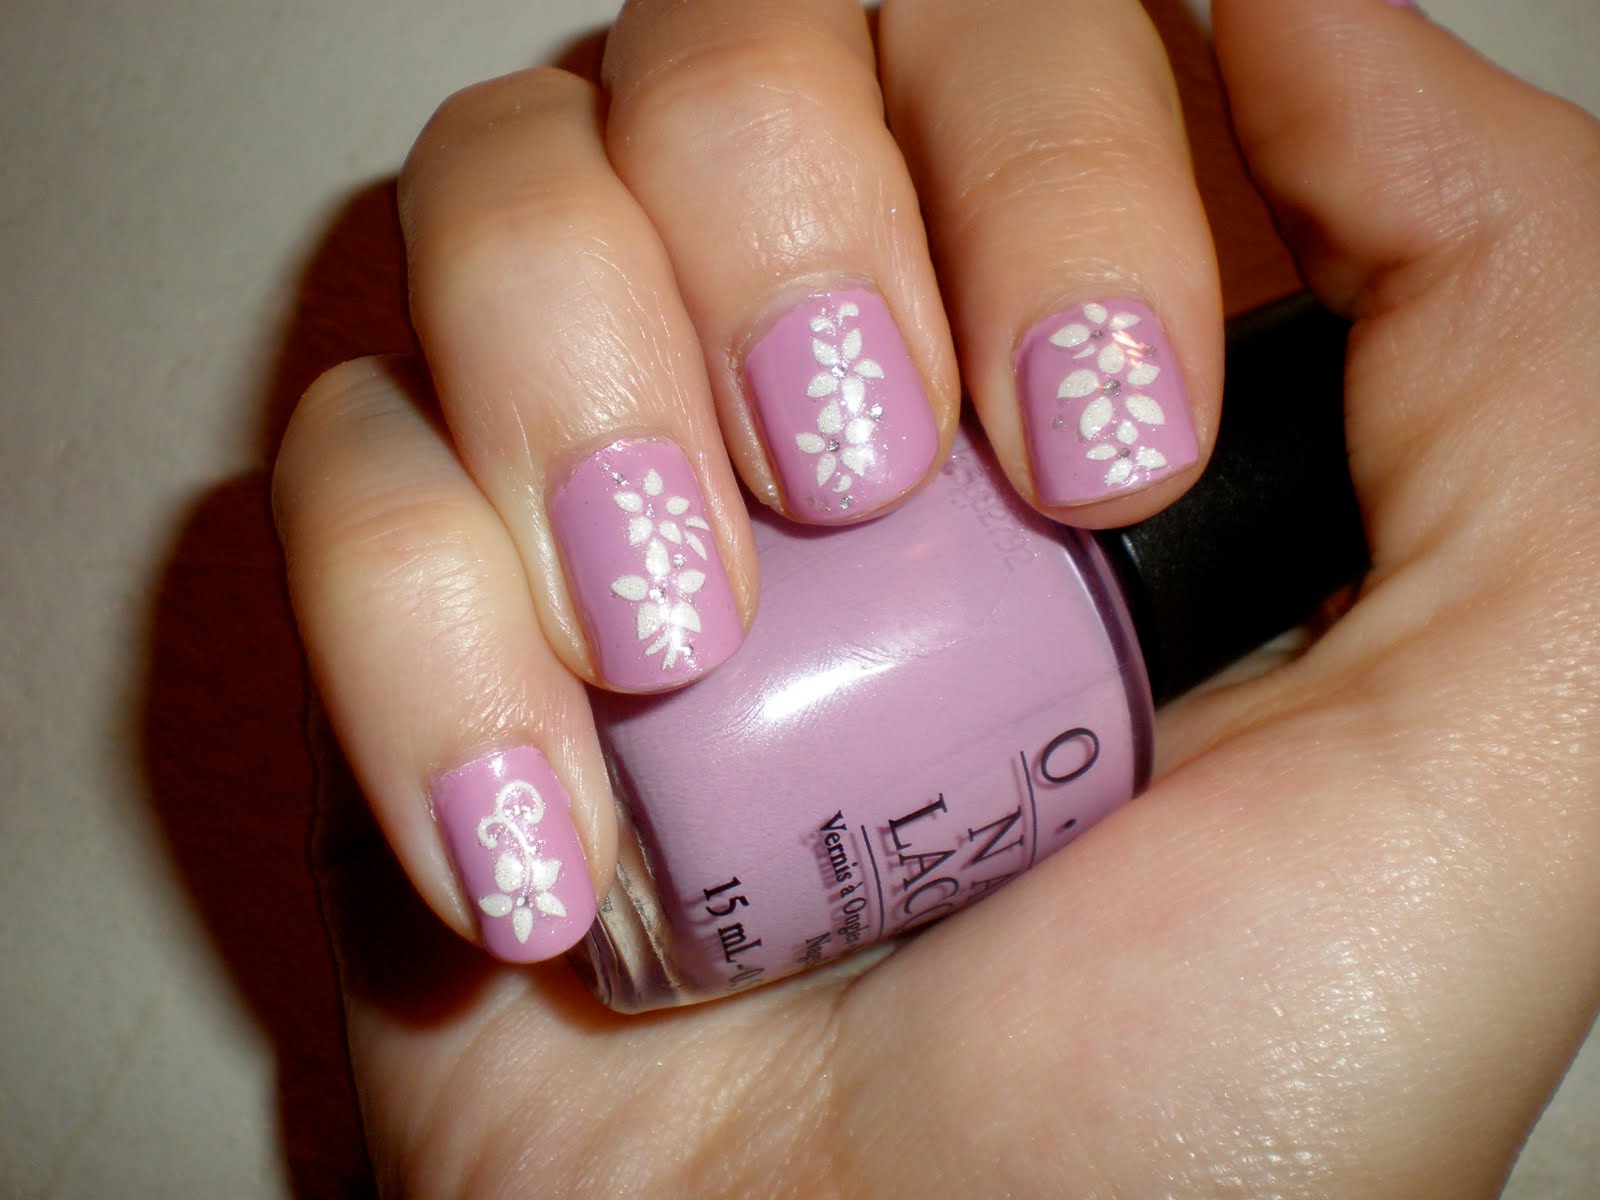 5. Floral Nail Designs - wide 6